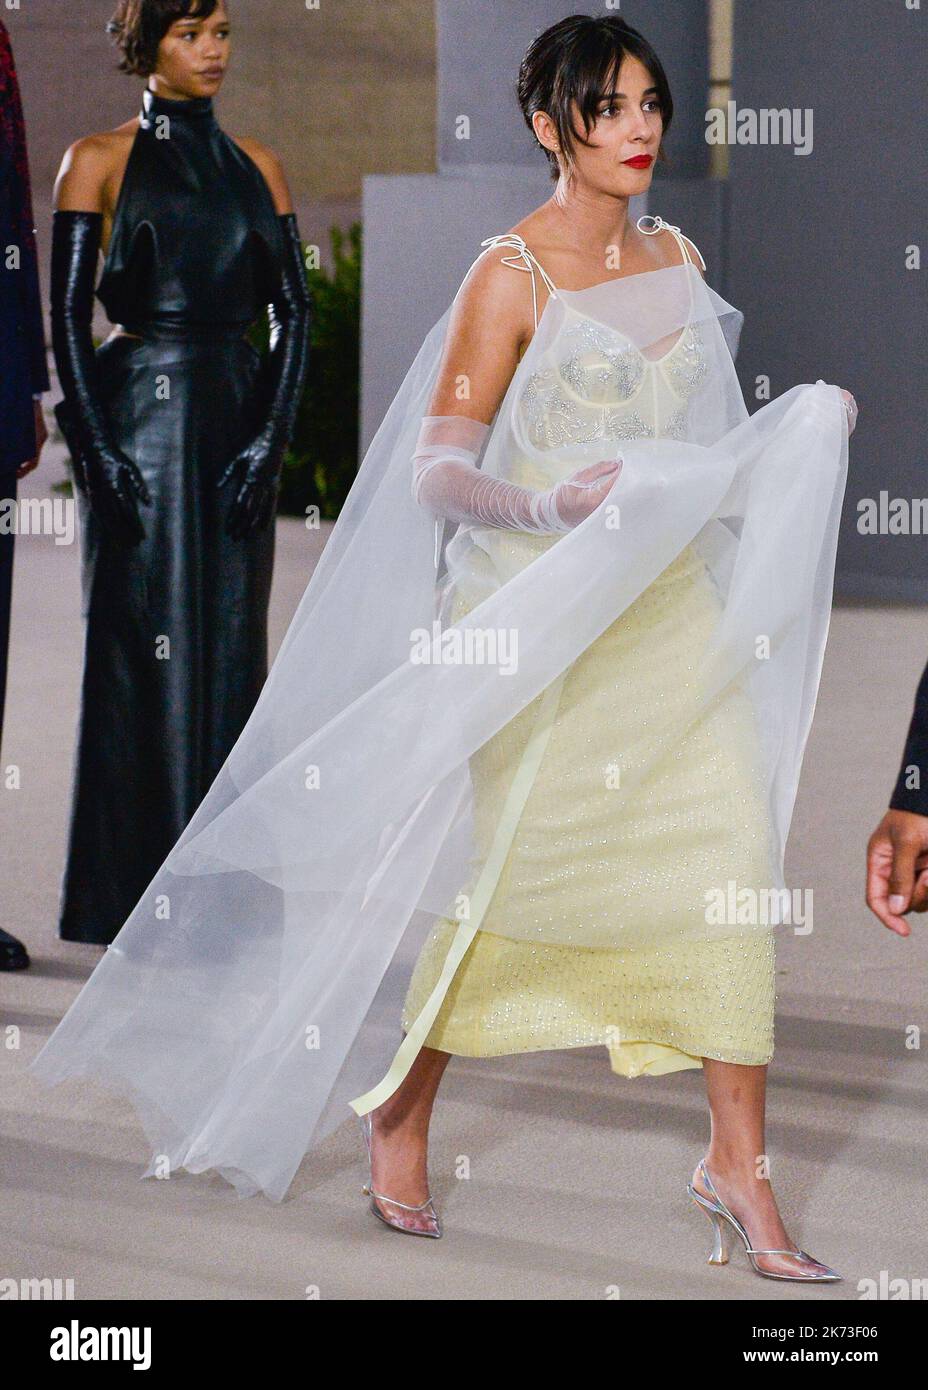 LOS ANGELES, CALIFORNIA, USA - OCTOBER 15: Naomi Scott arrives at the 2nd Annual Academy Museum of Motion Pictures Gala presented by Rolex held at the Academy Museum of Motion Pictures on October 15, 2022 in Los Angeles, California, United States. (Photo by Image Press Agency) Stock Photo